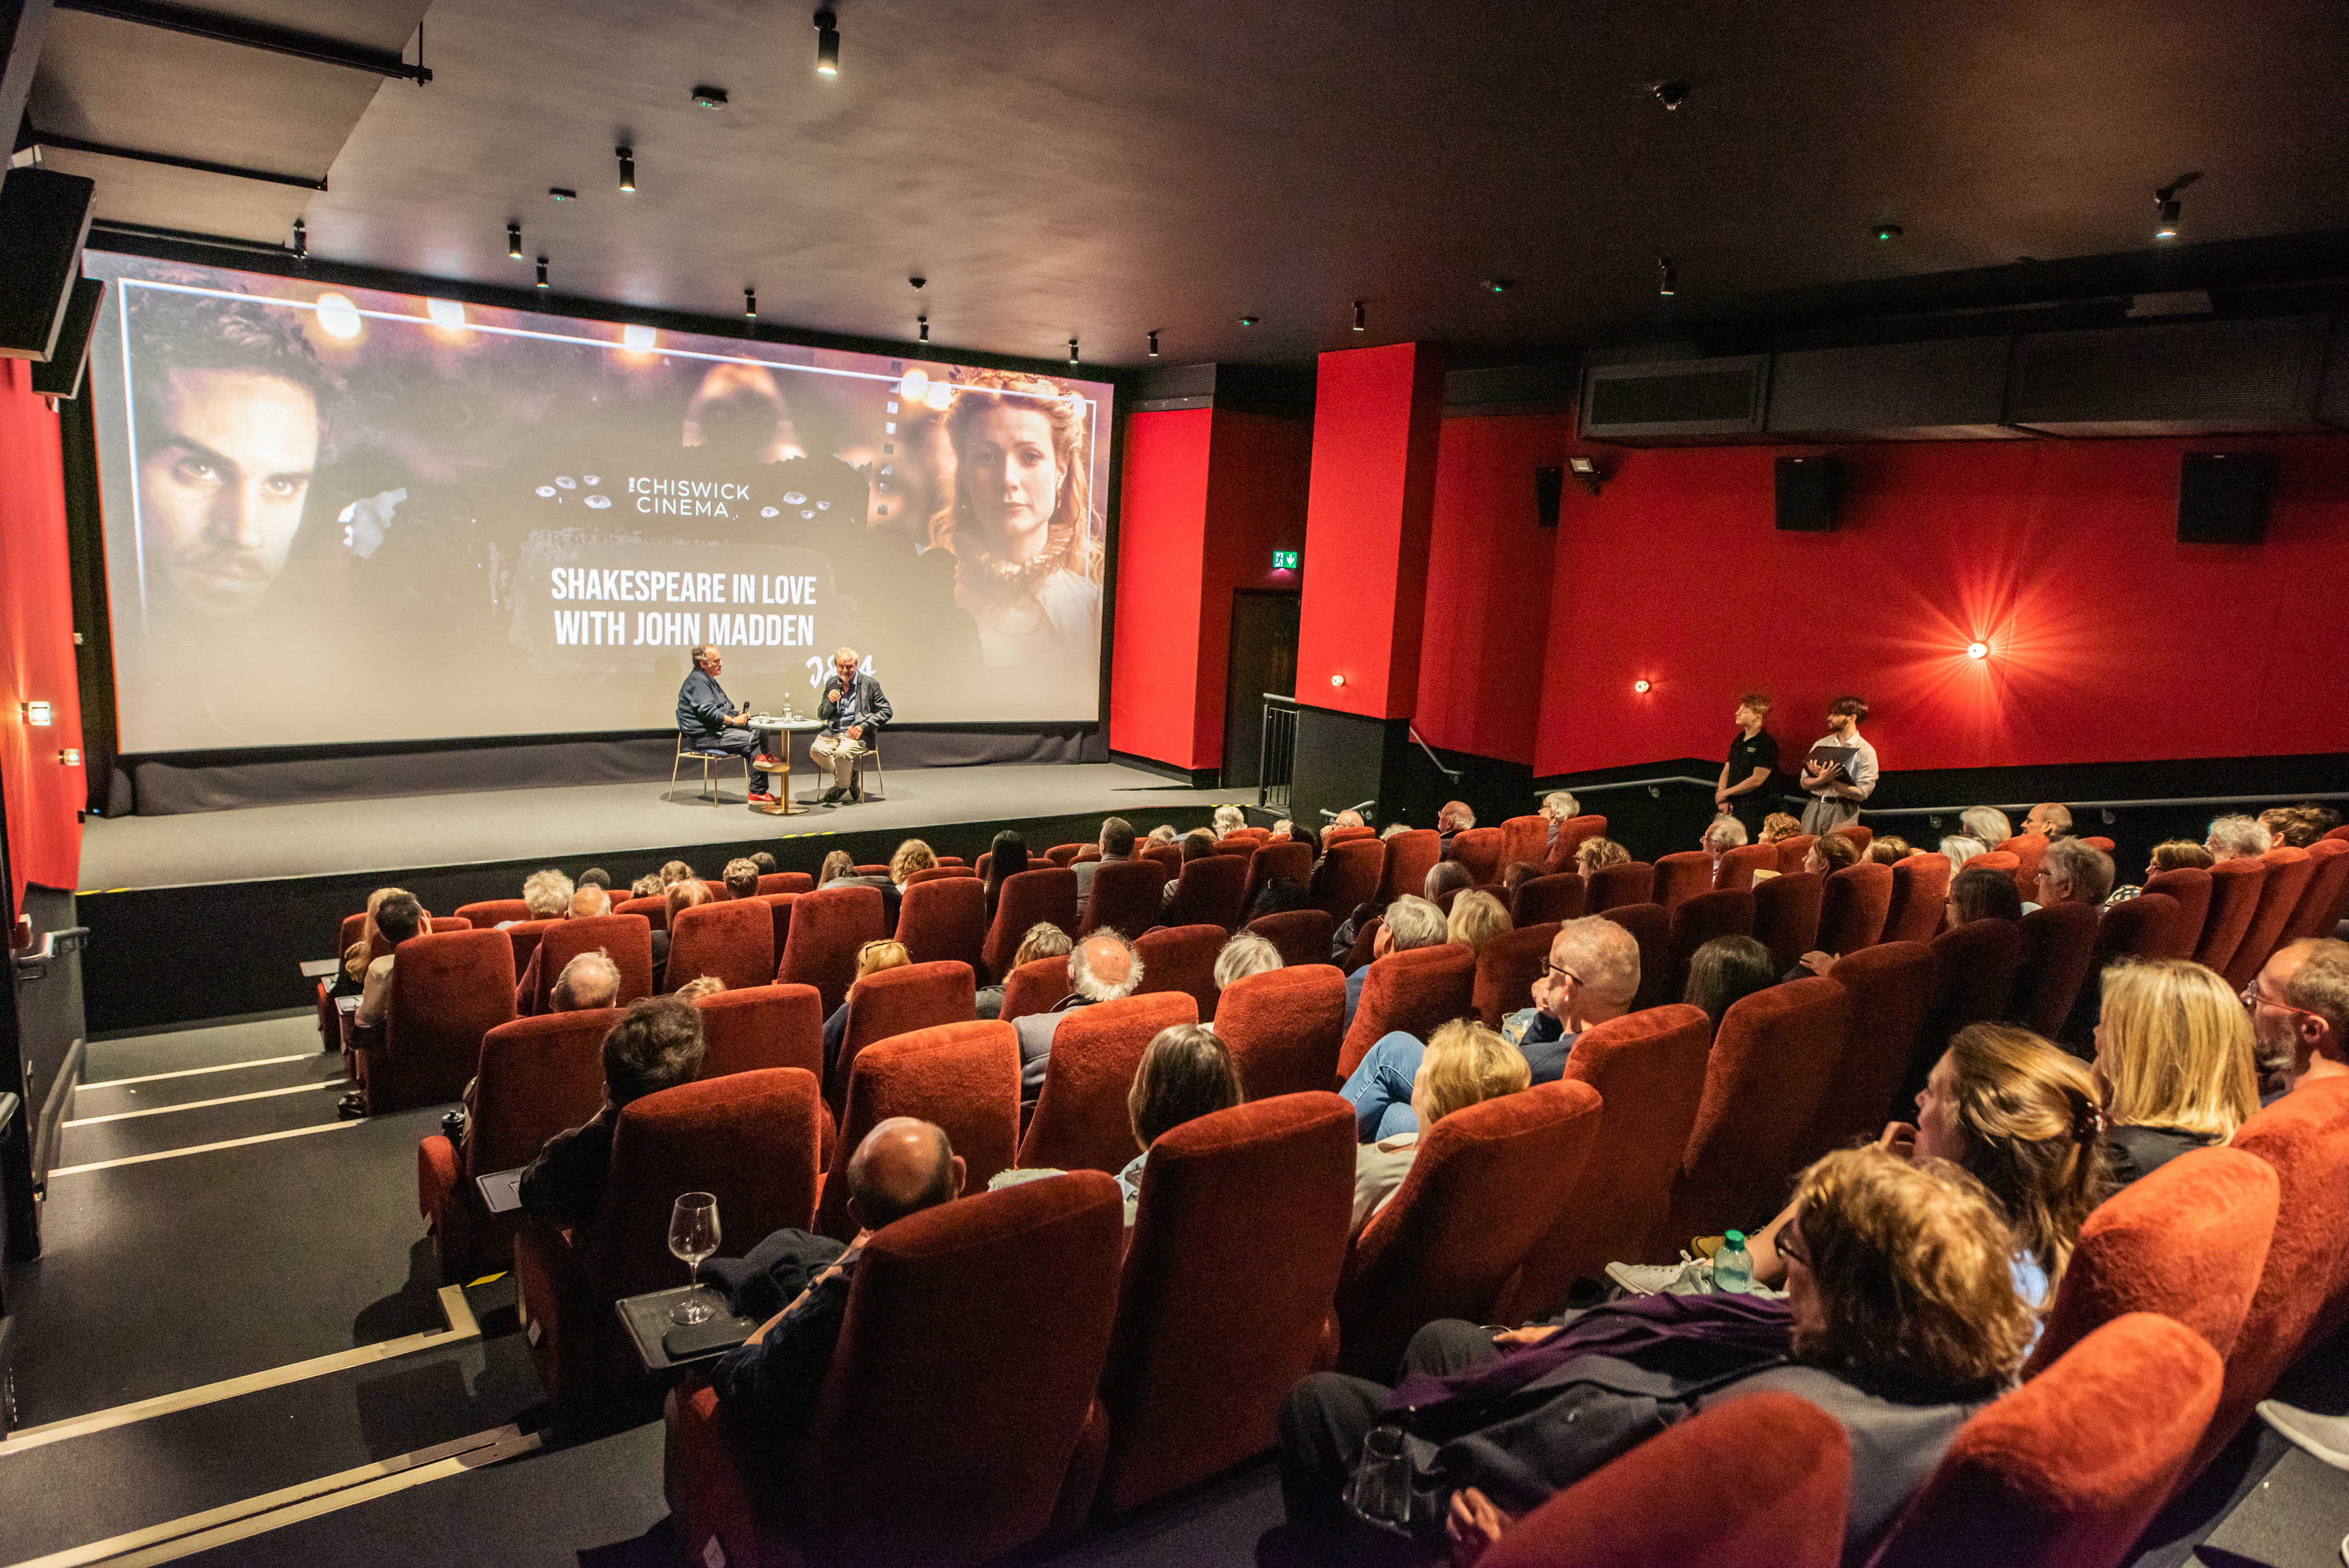 Two Years of the Chiswick Cinema - Shakespeare in Love Q&A with John Madden